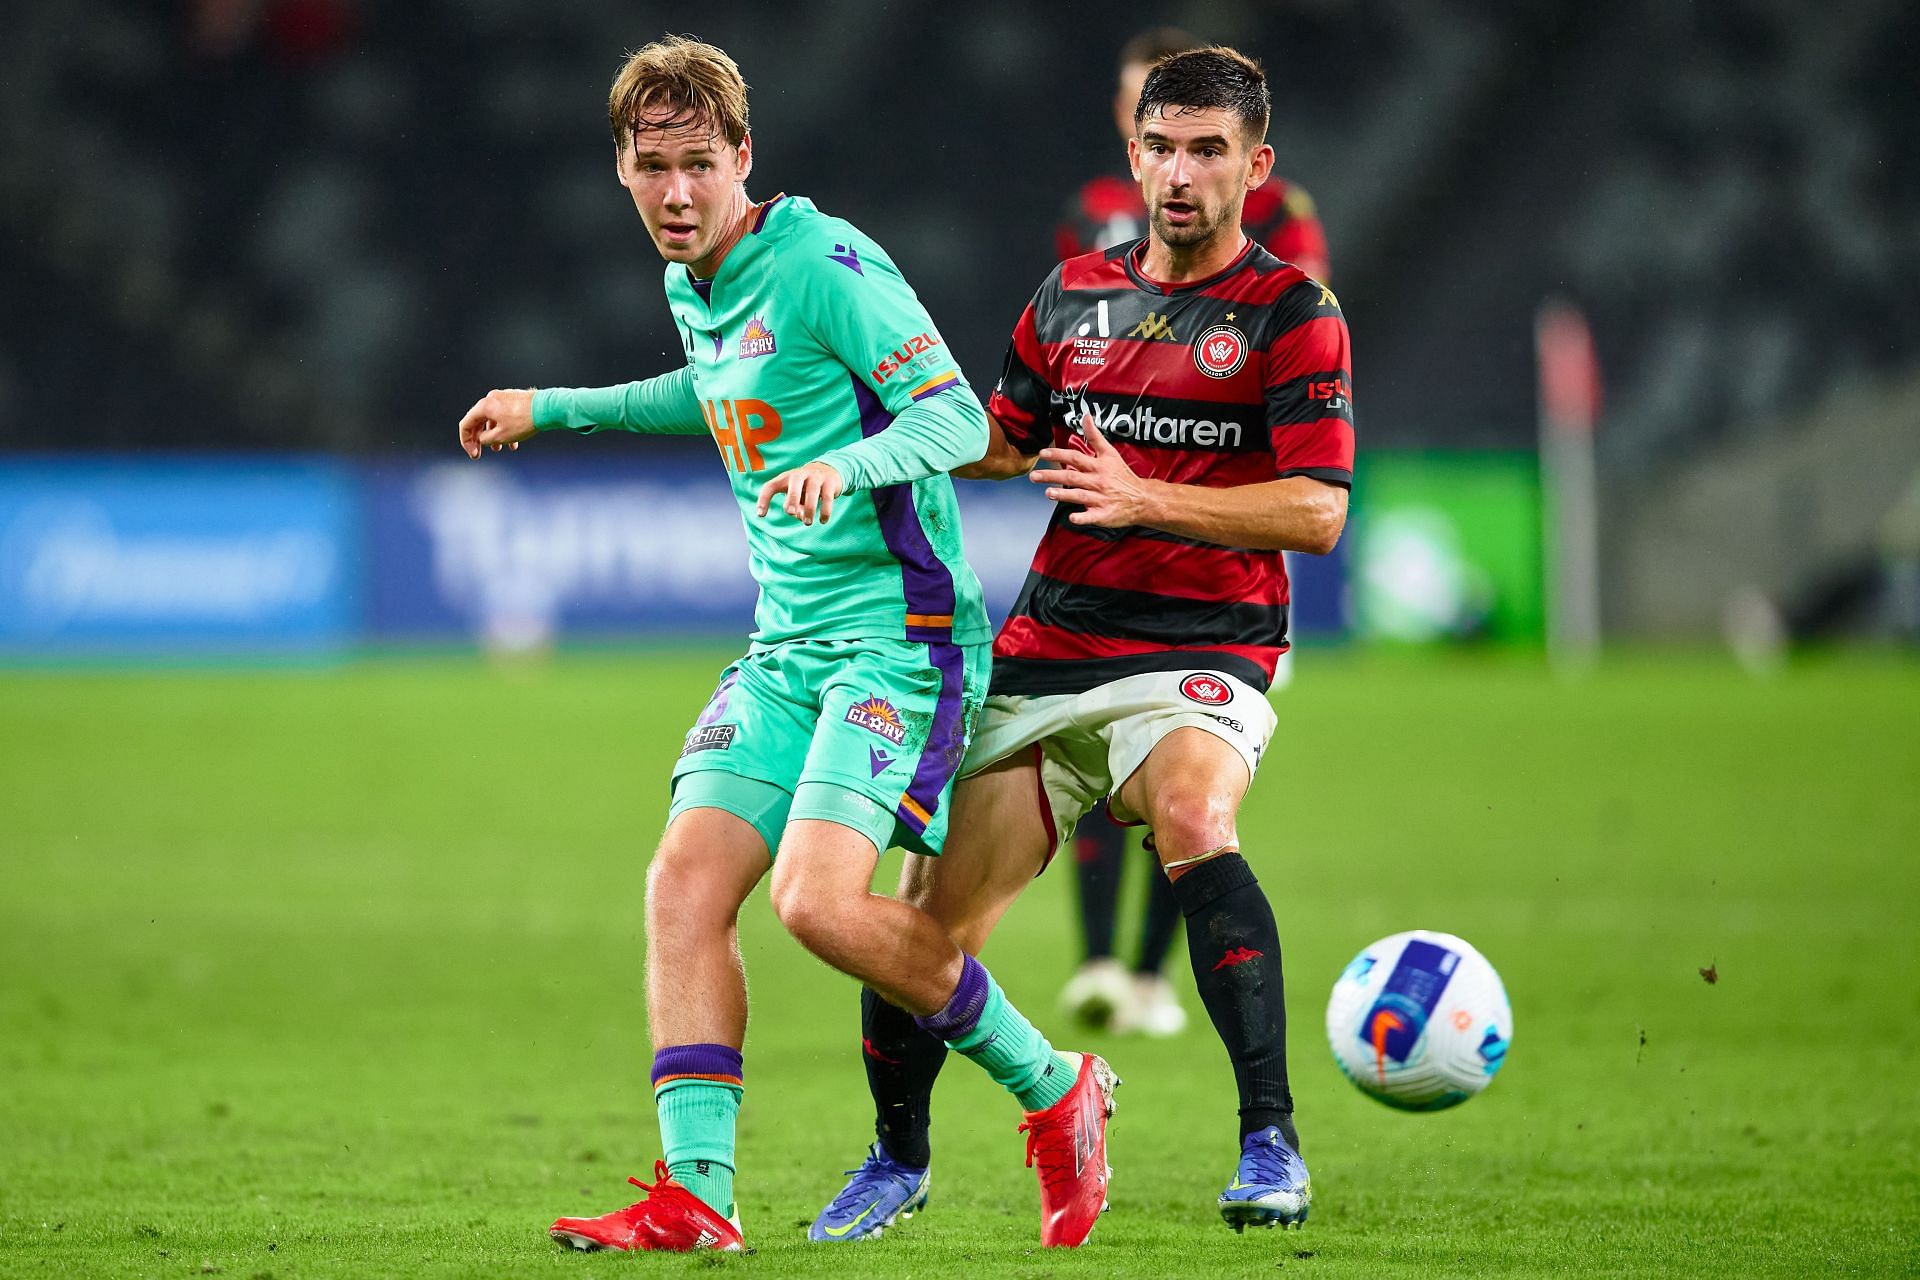 Western Sydney Wanderers take on Perth Glory this weekend